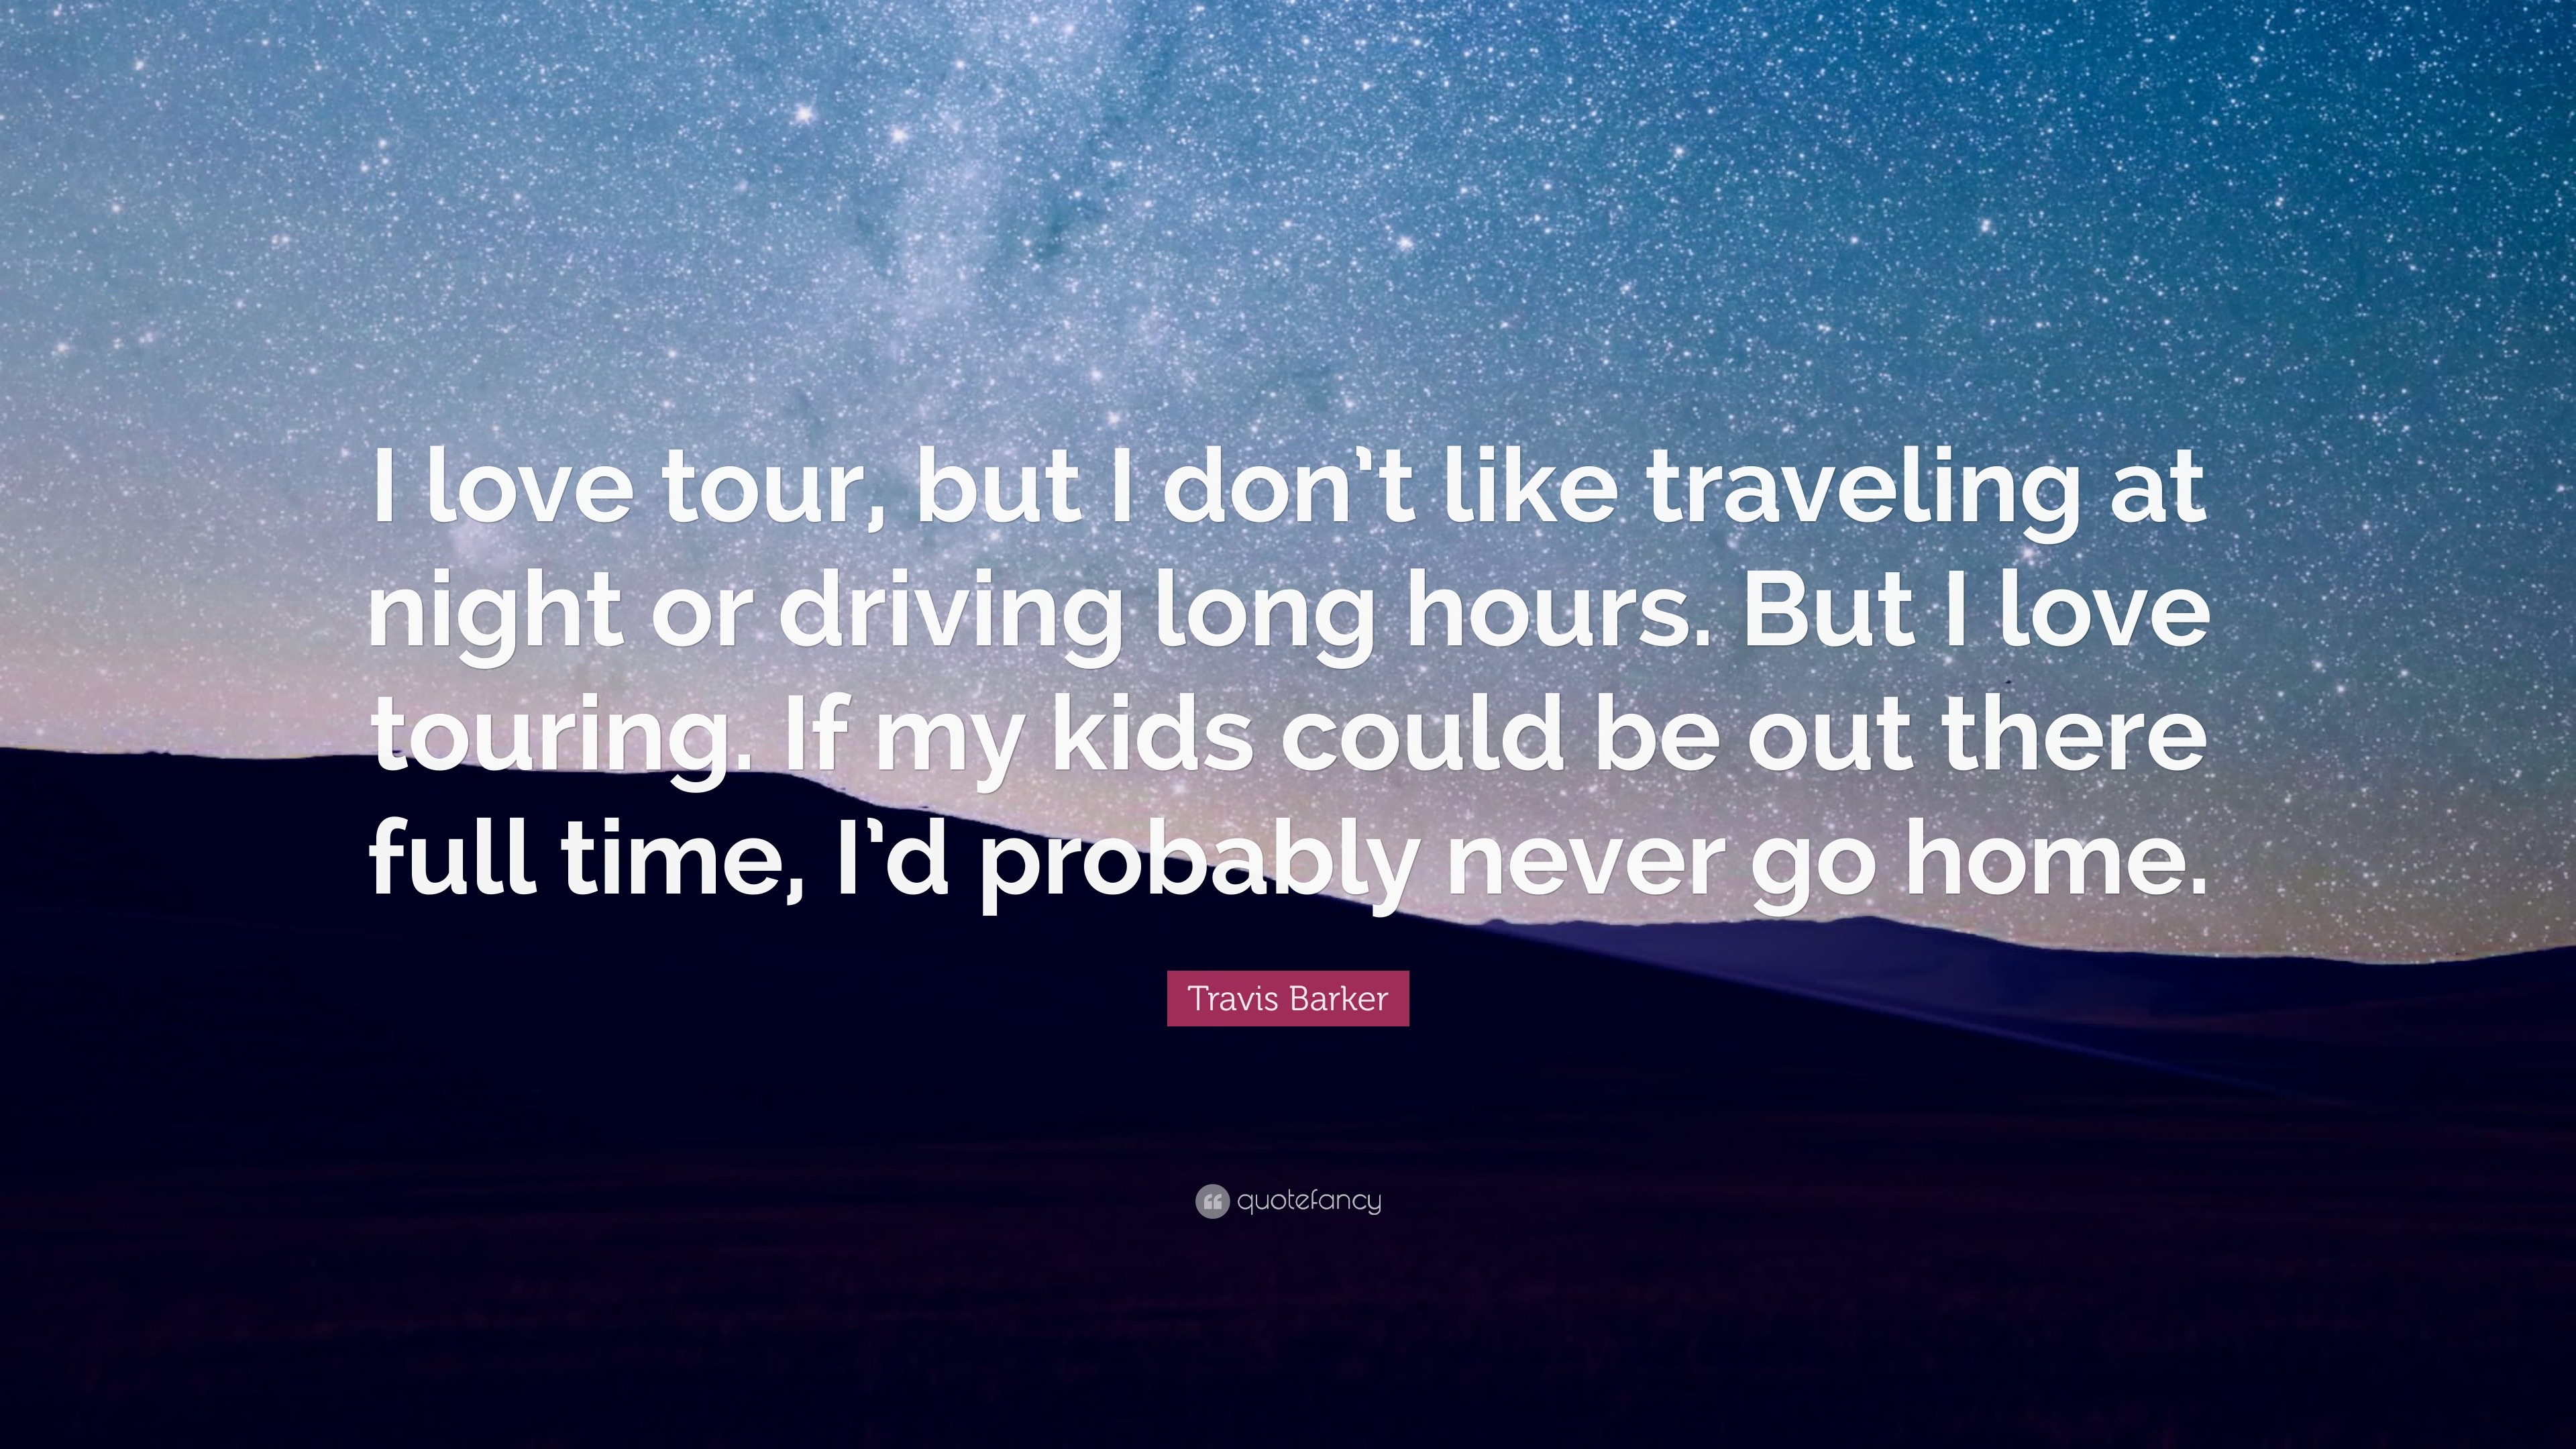 Travis Barker Quote “I love tour but I don t like traveling